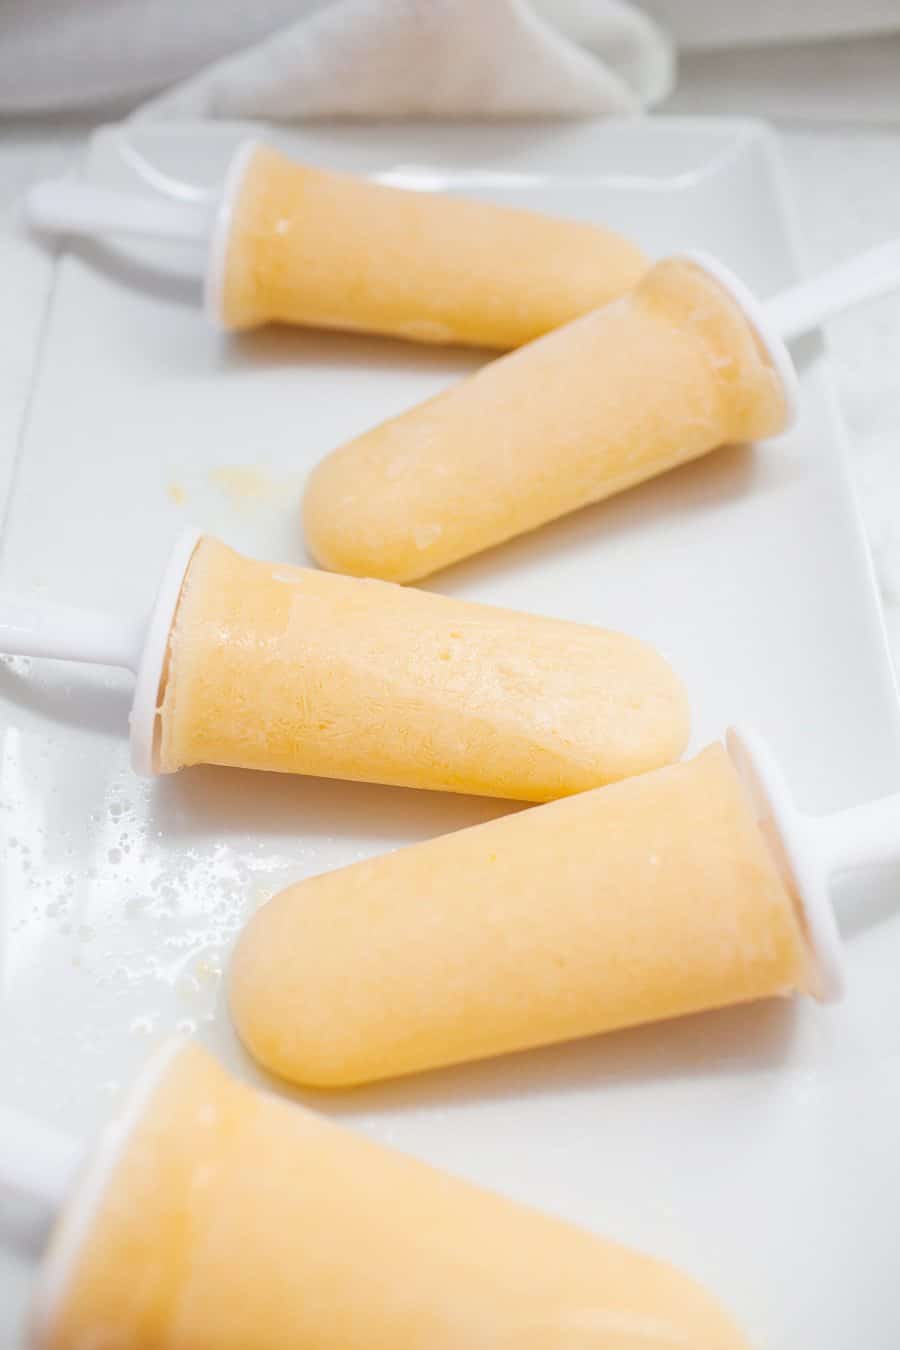 These healthy peach lemonade popsicles are the perfect summer treat! Cool down with these refined sugar free, creamy, fruity pops.